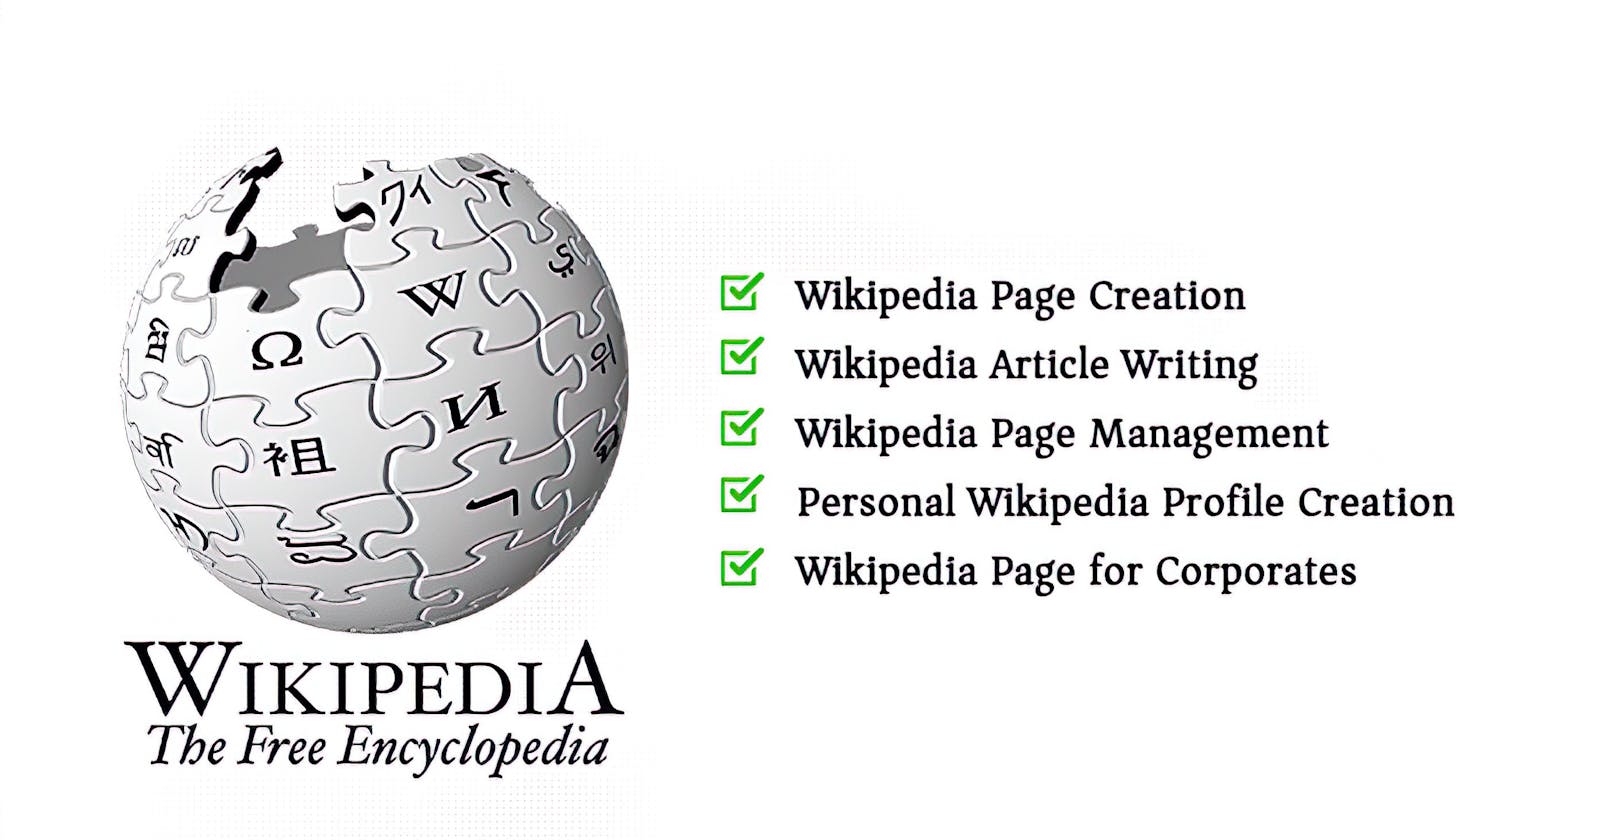 Elite Ten Wikipedia page creation services That Will Elevate Your Digital Visibility Exponentially